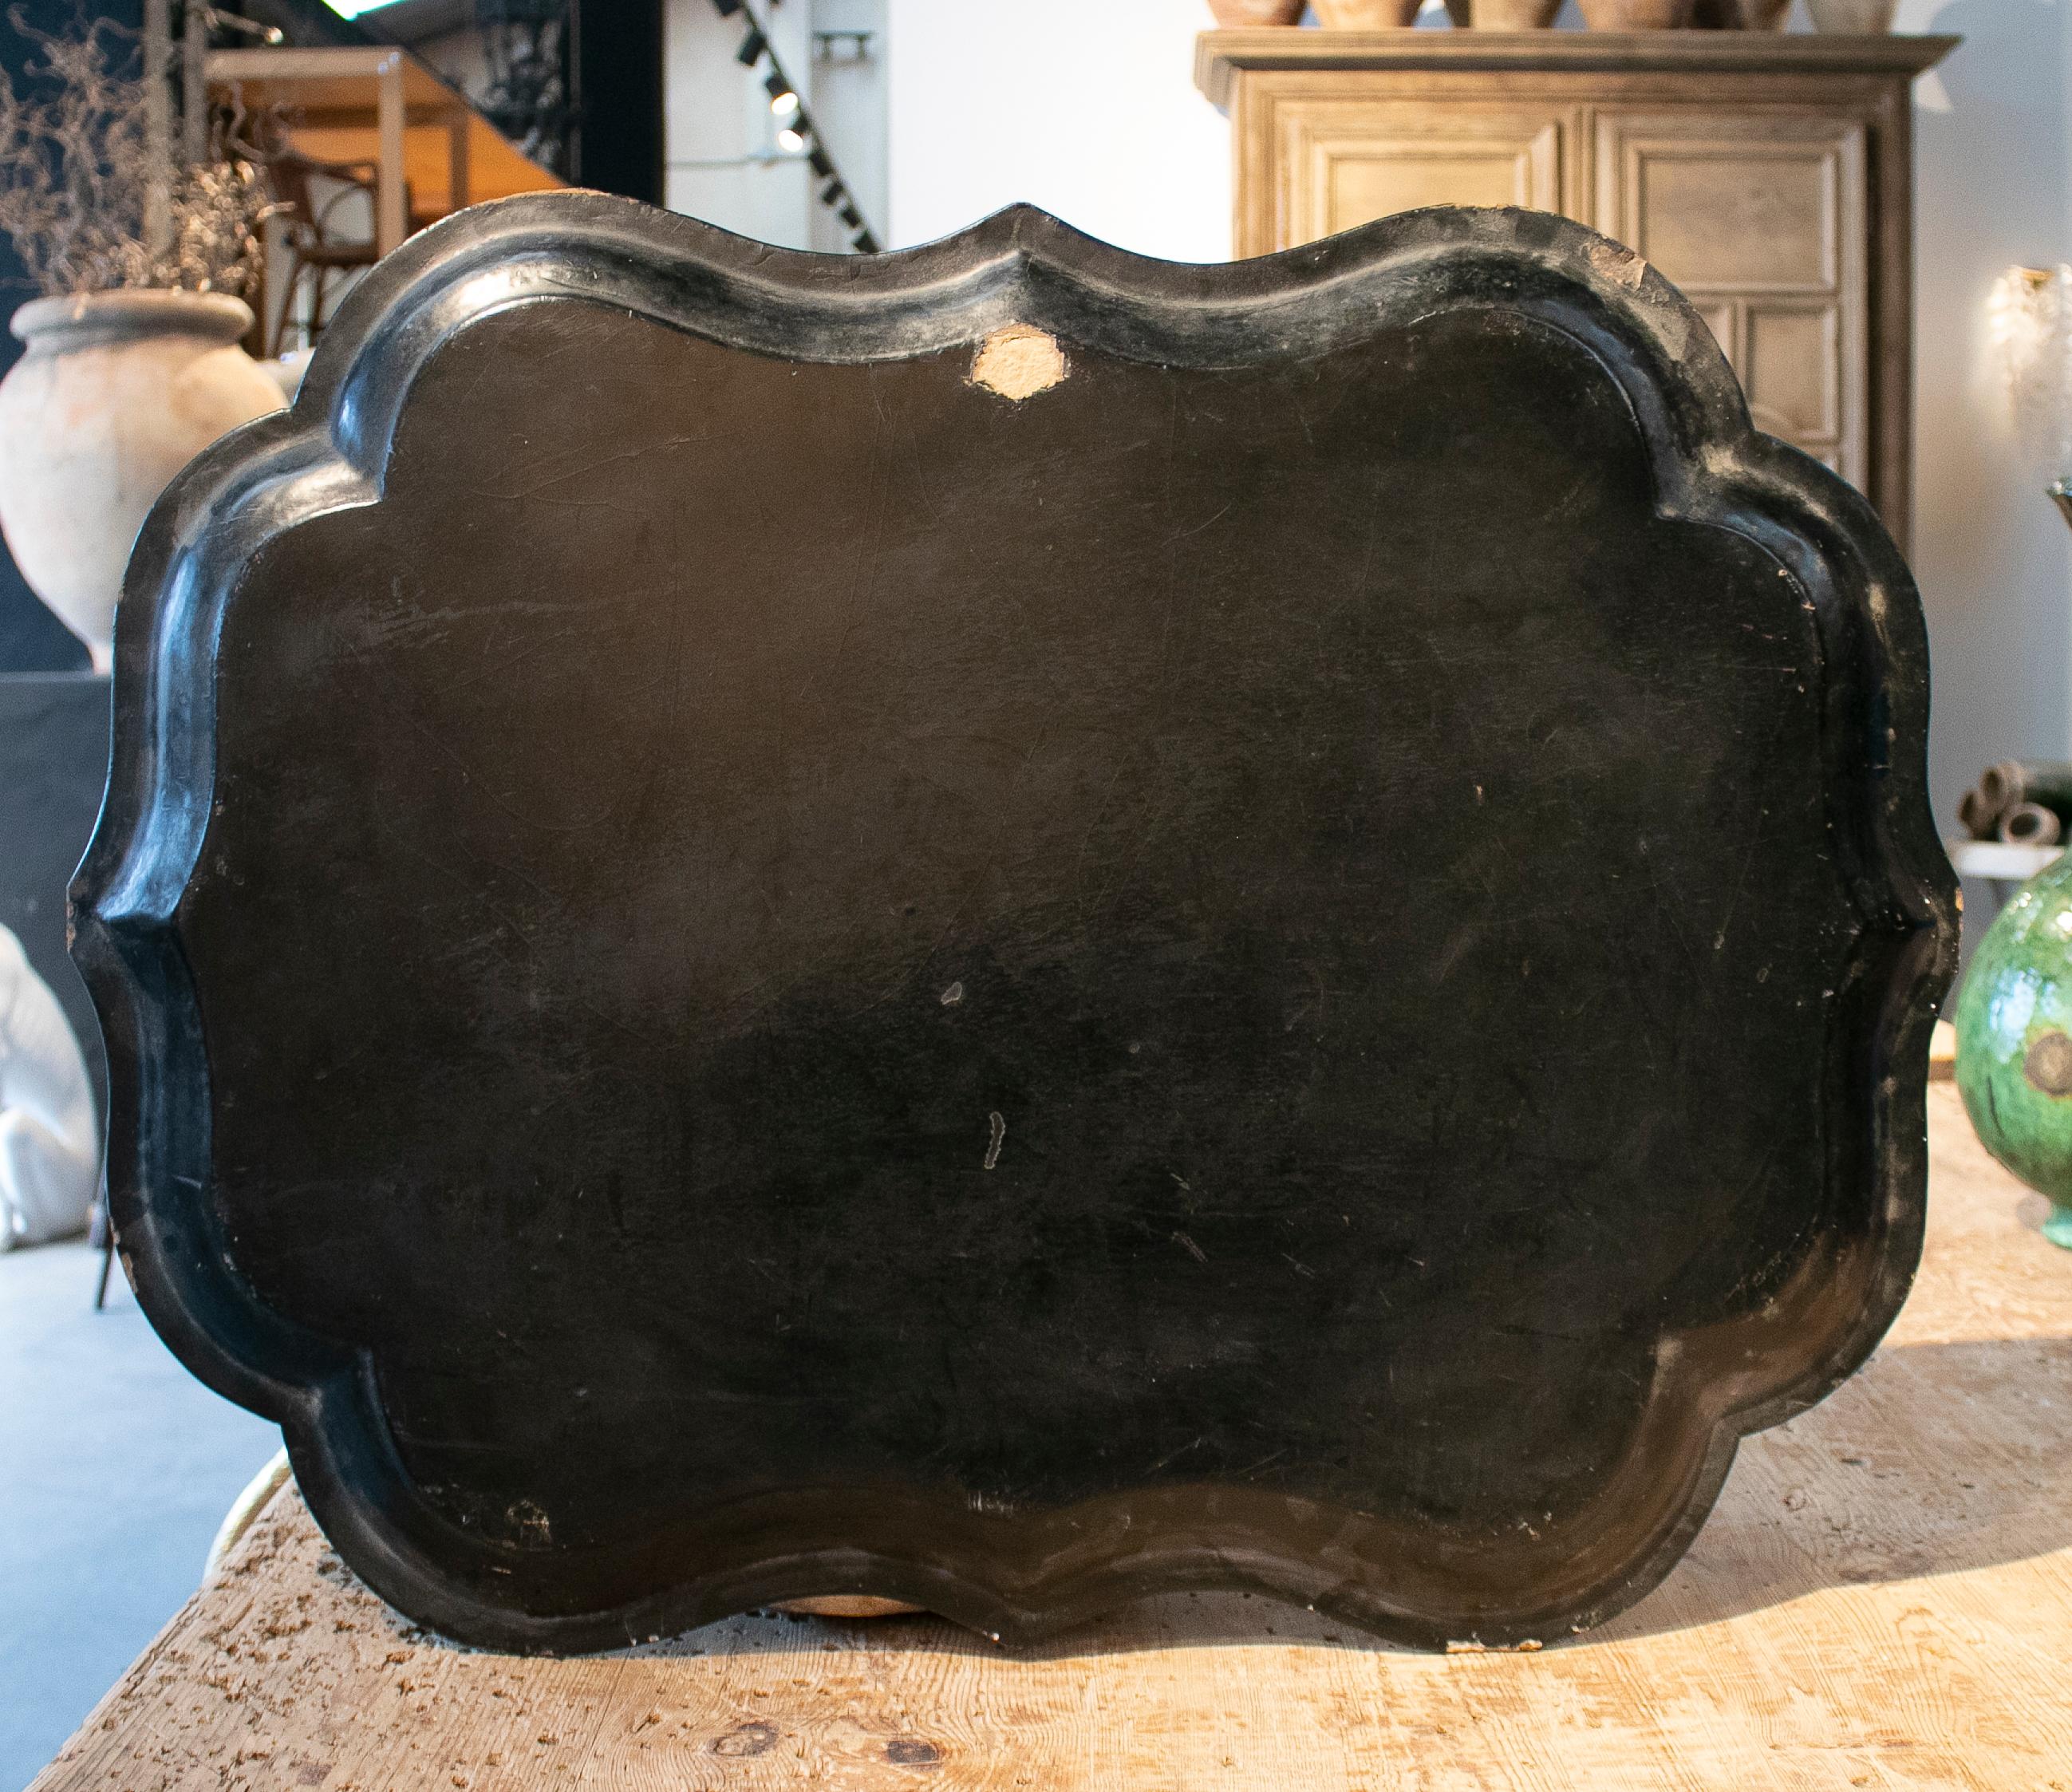 19th century French papier mâché tray with rose inlays.